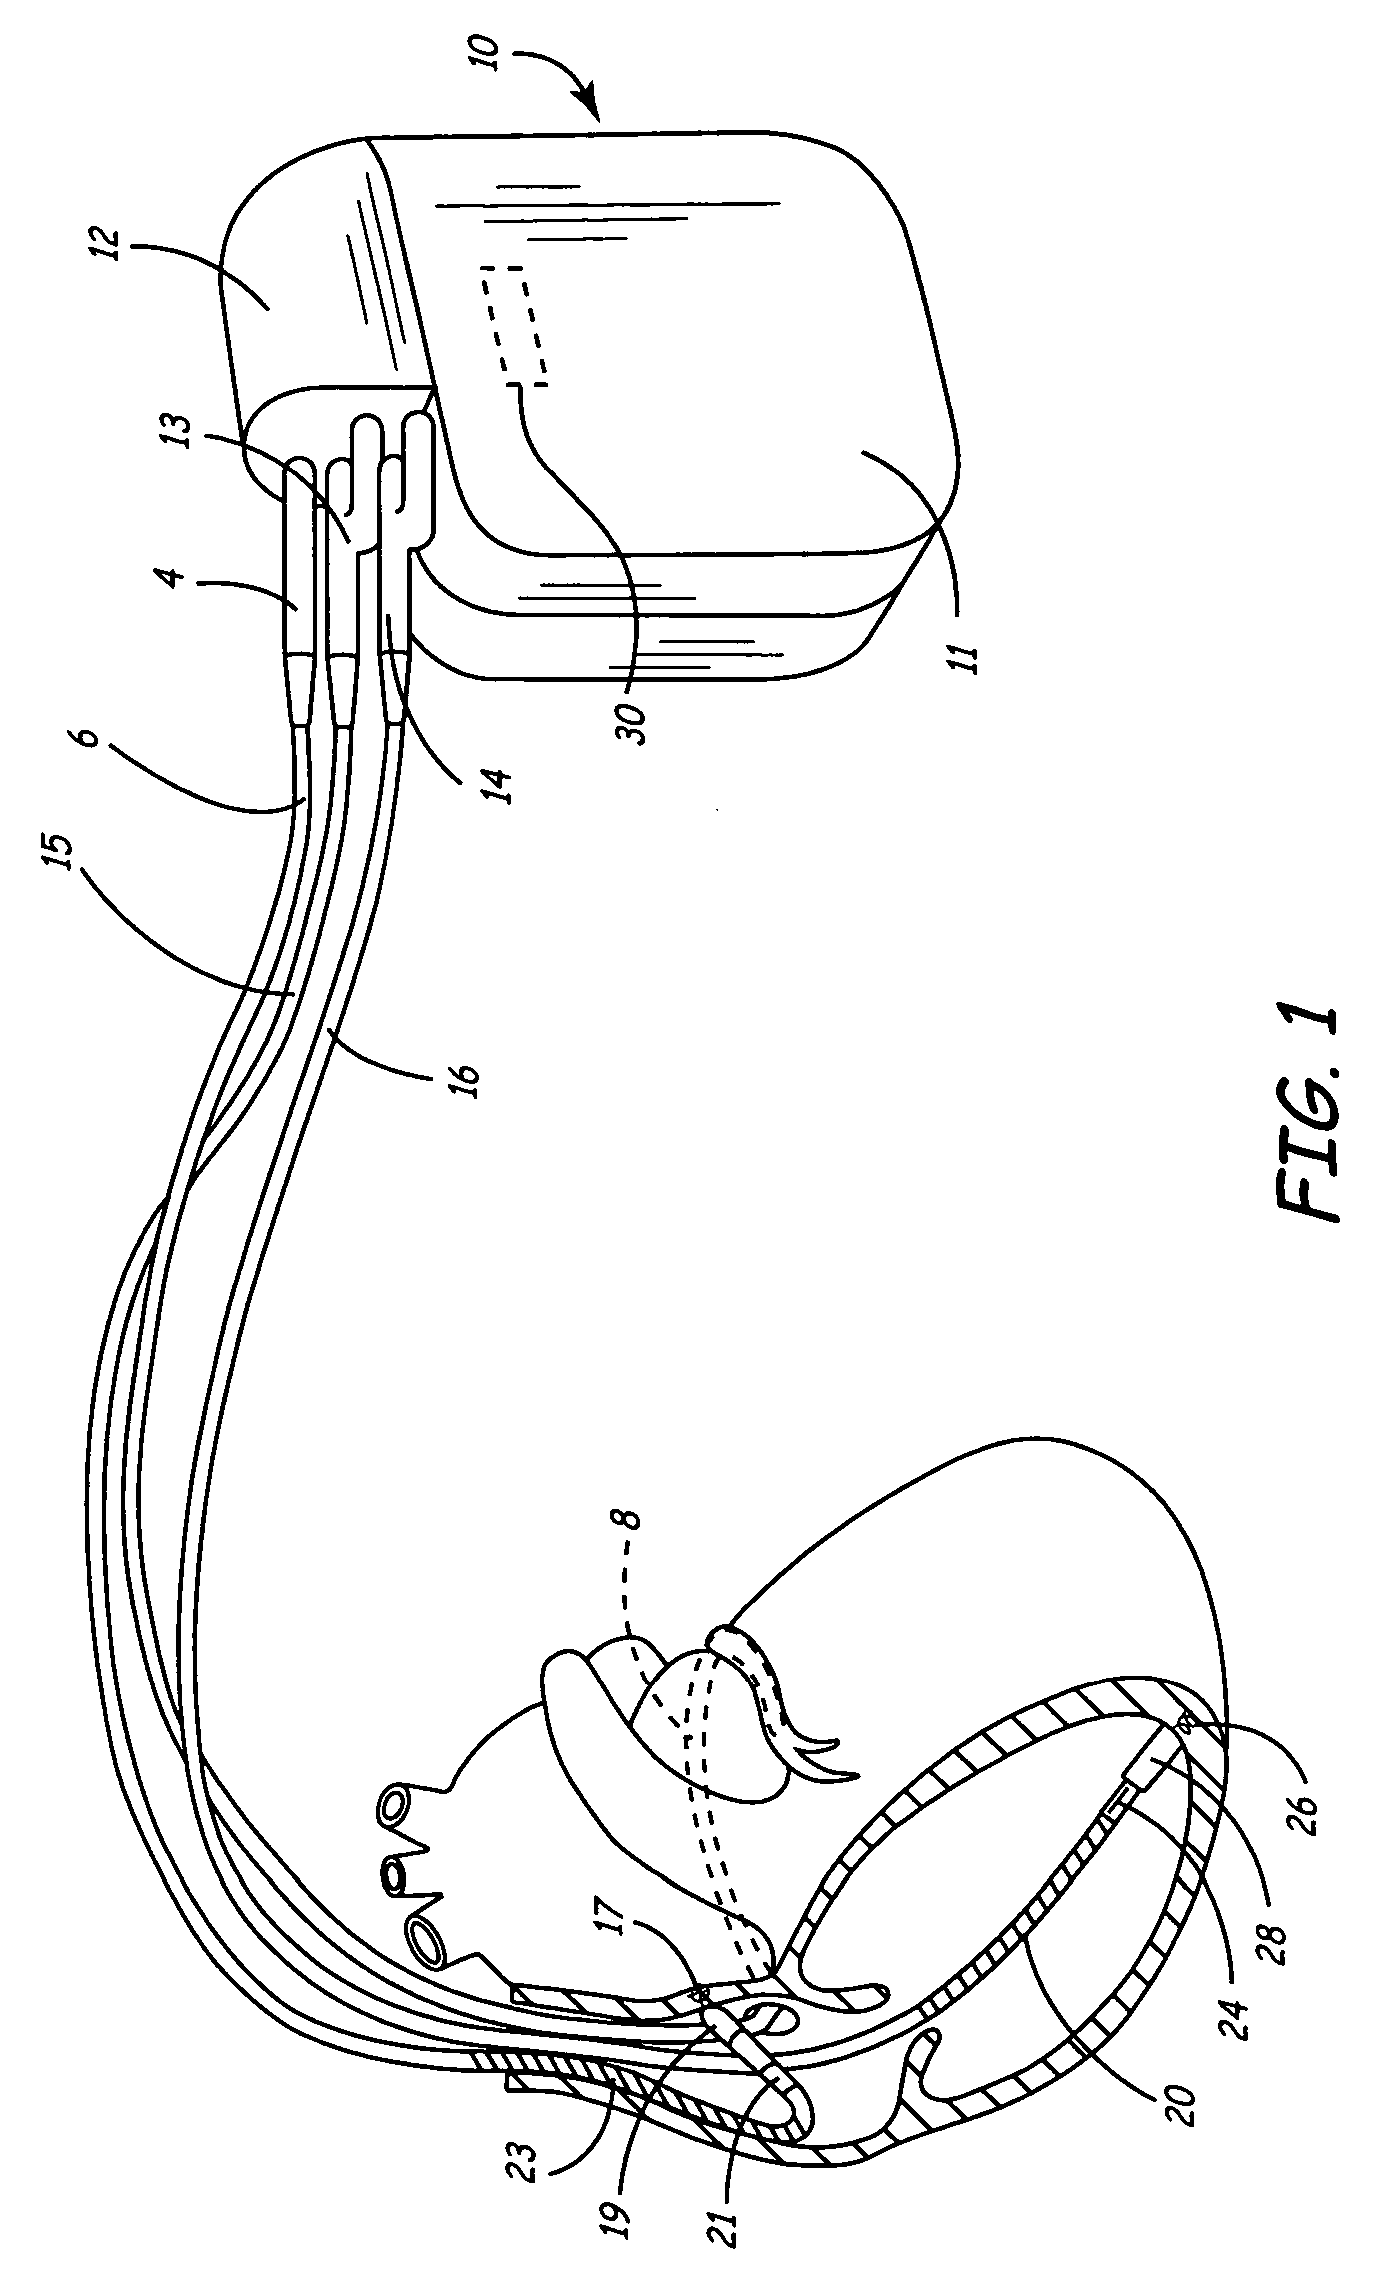 Method and apparatus for temporarily varying a parameter in an implantable medical device